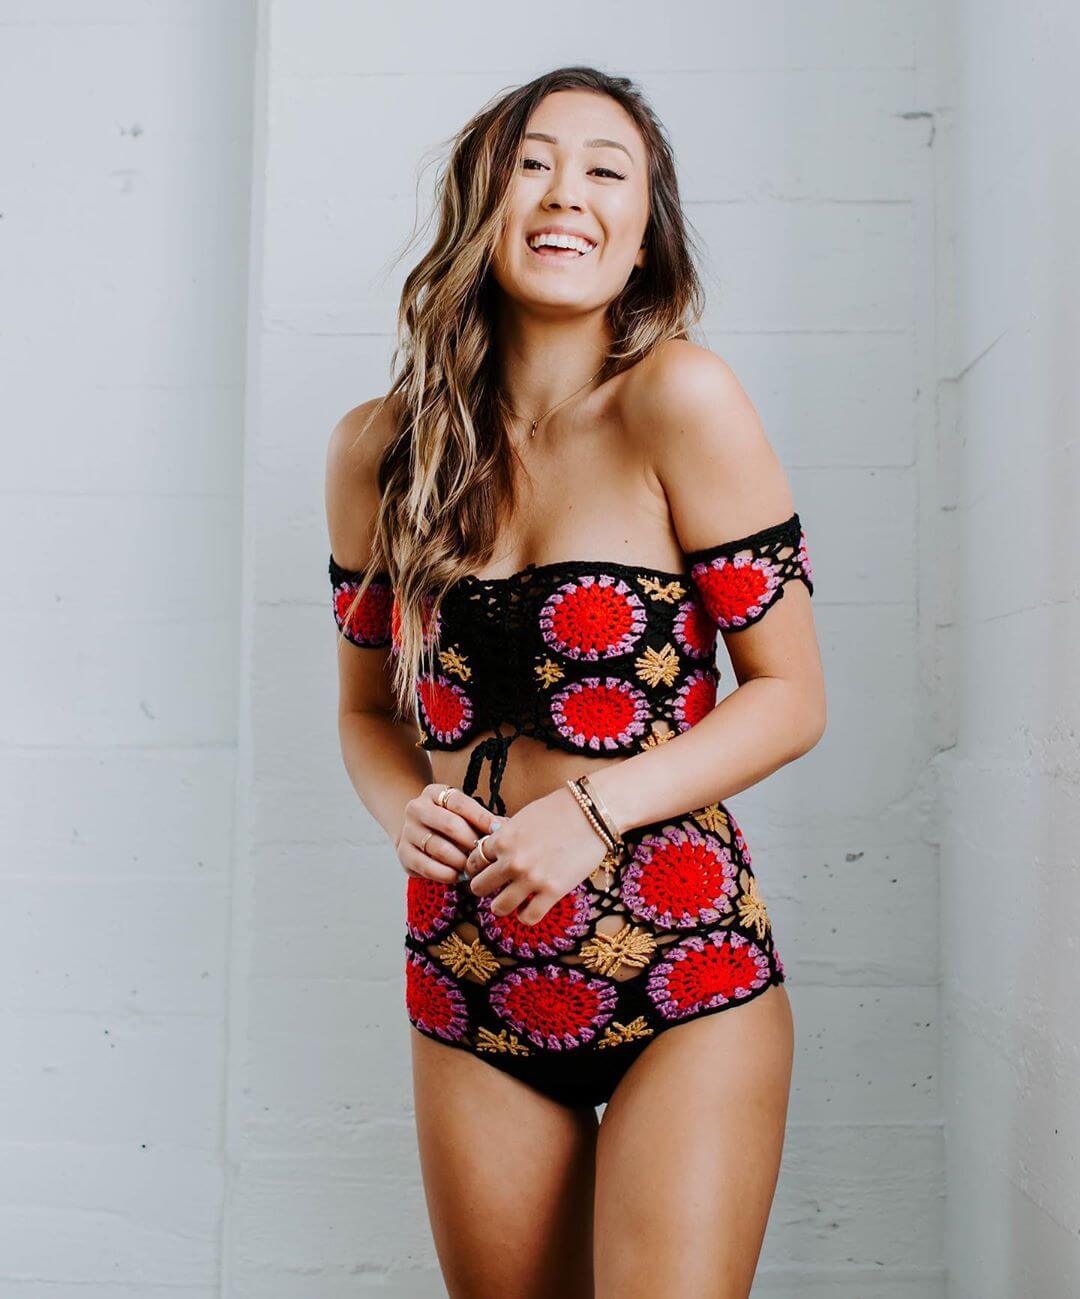 51 Sexy LaurDIY Boobs Pictures Are Essentially Attractive 19